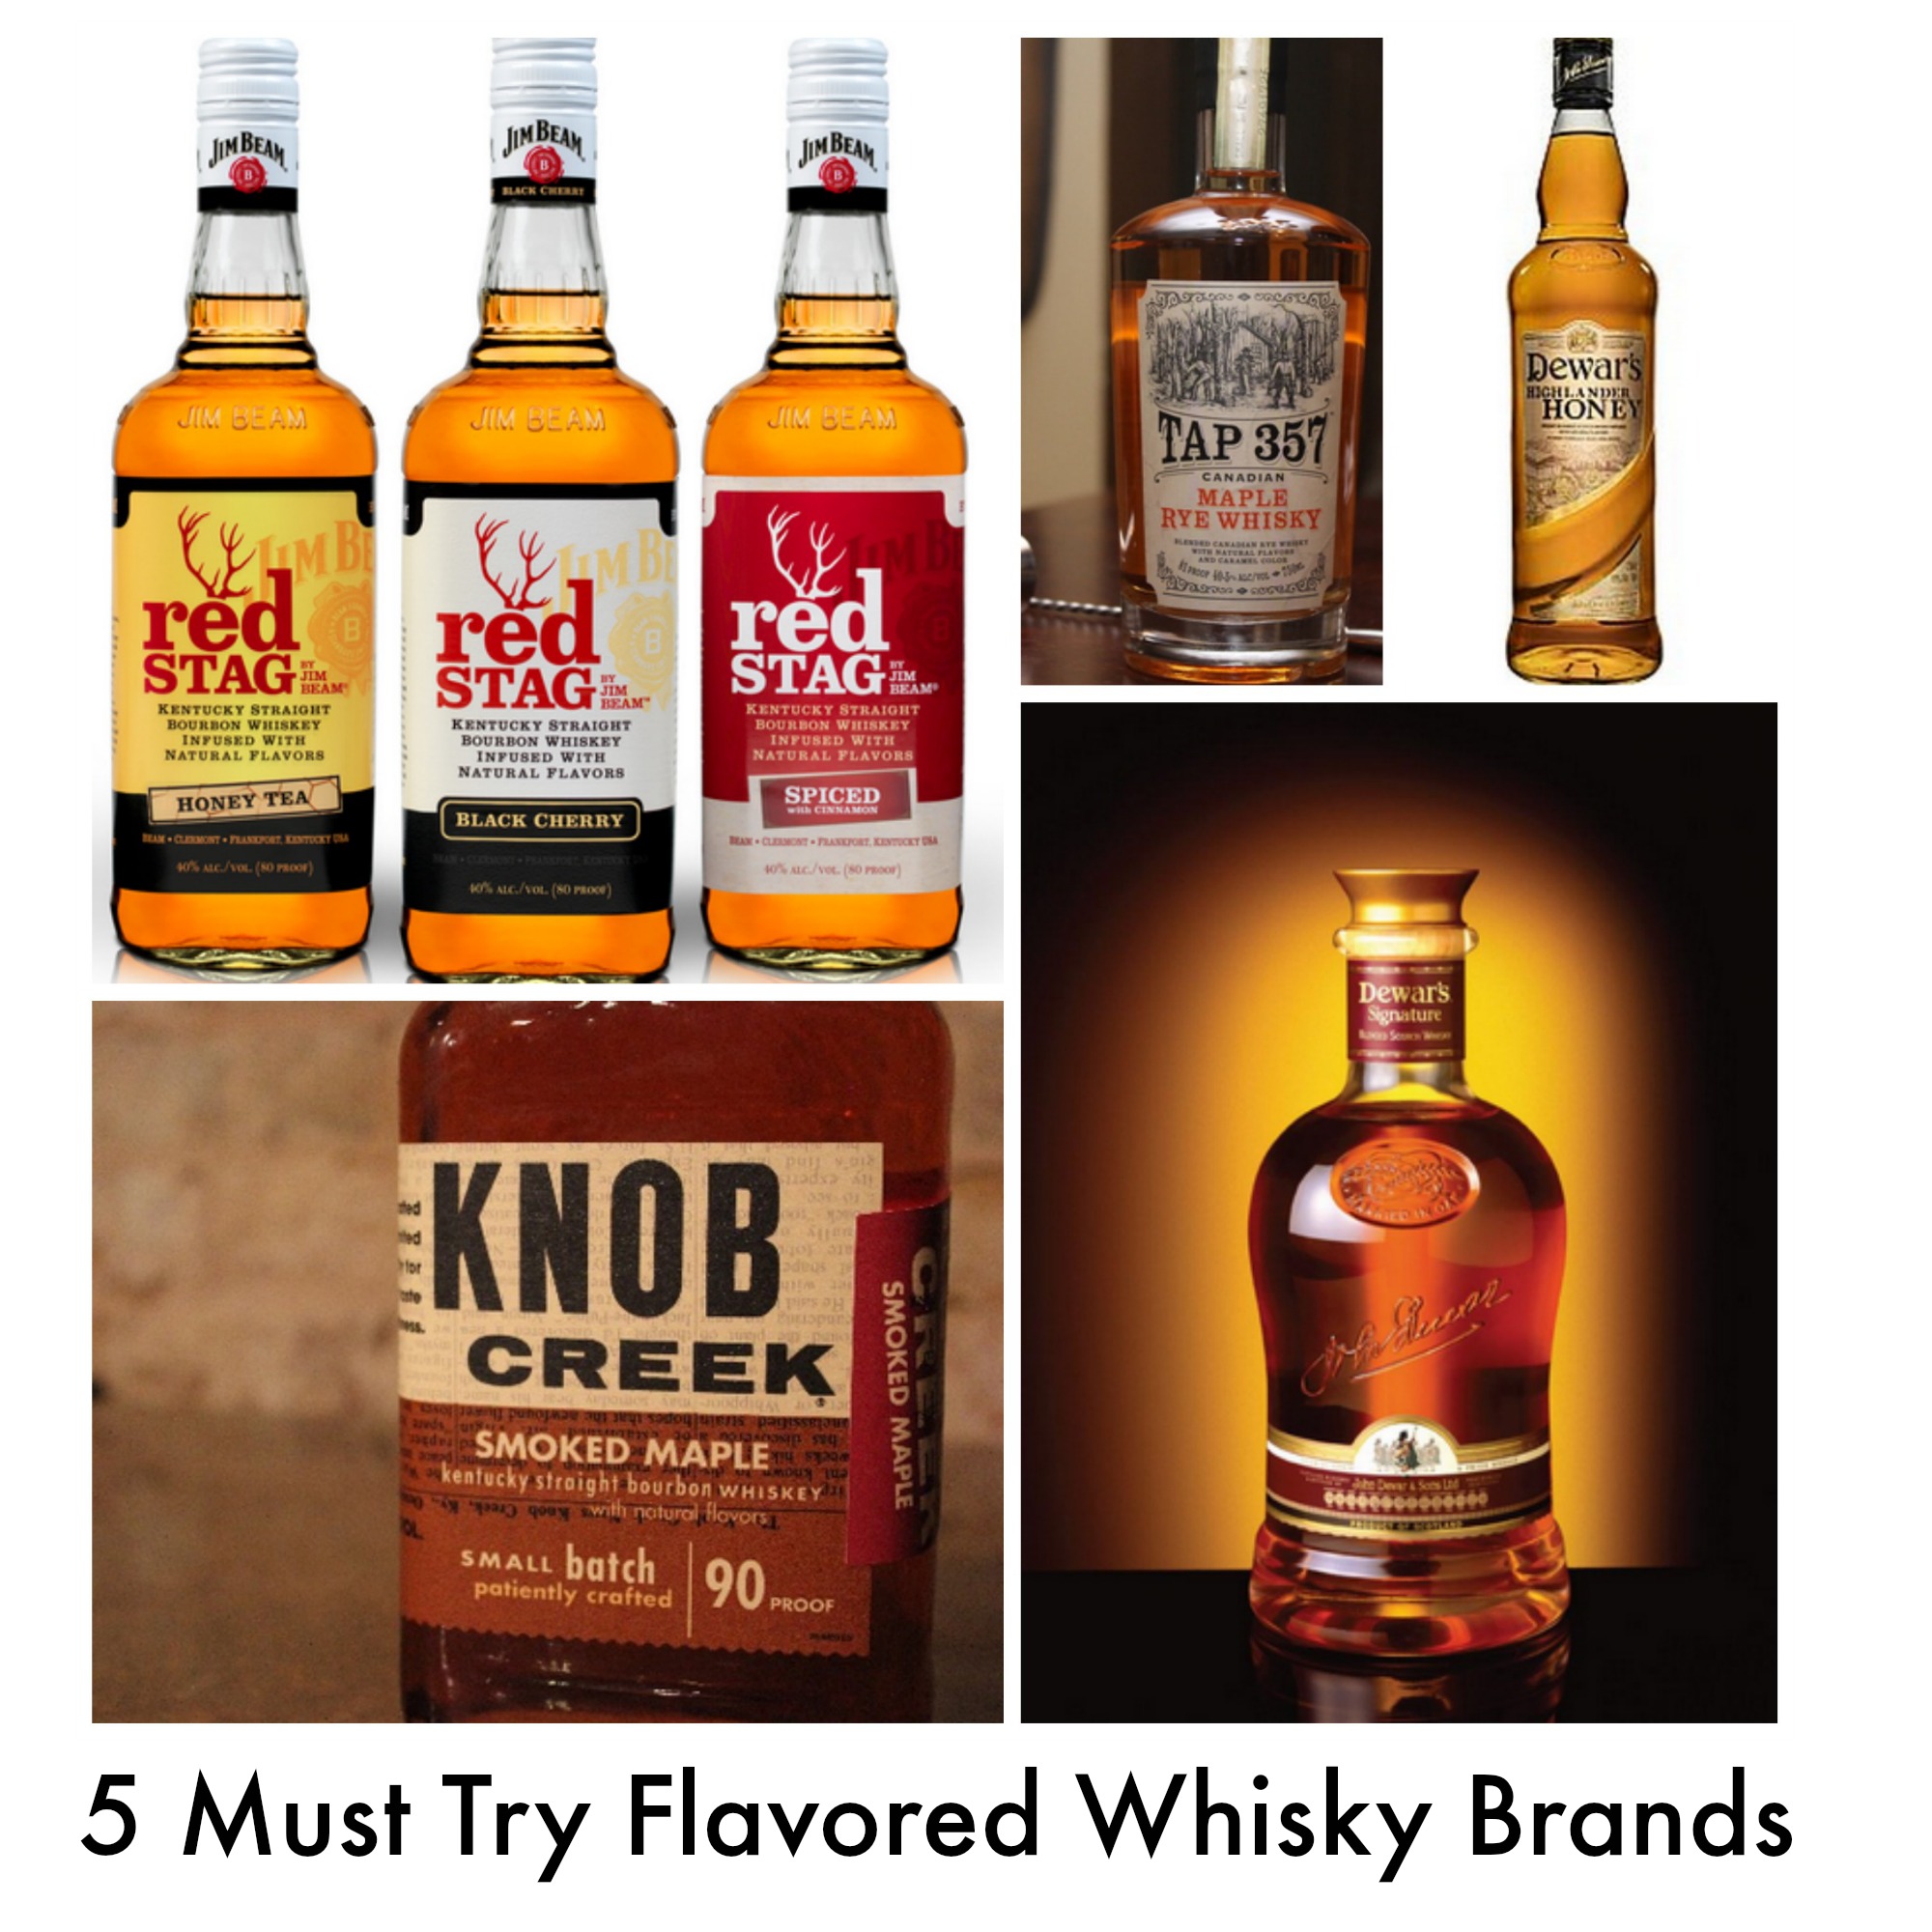 5 Must-Try Flavored Whisky Brands